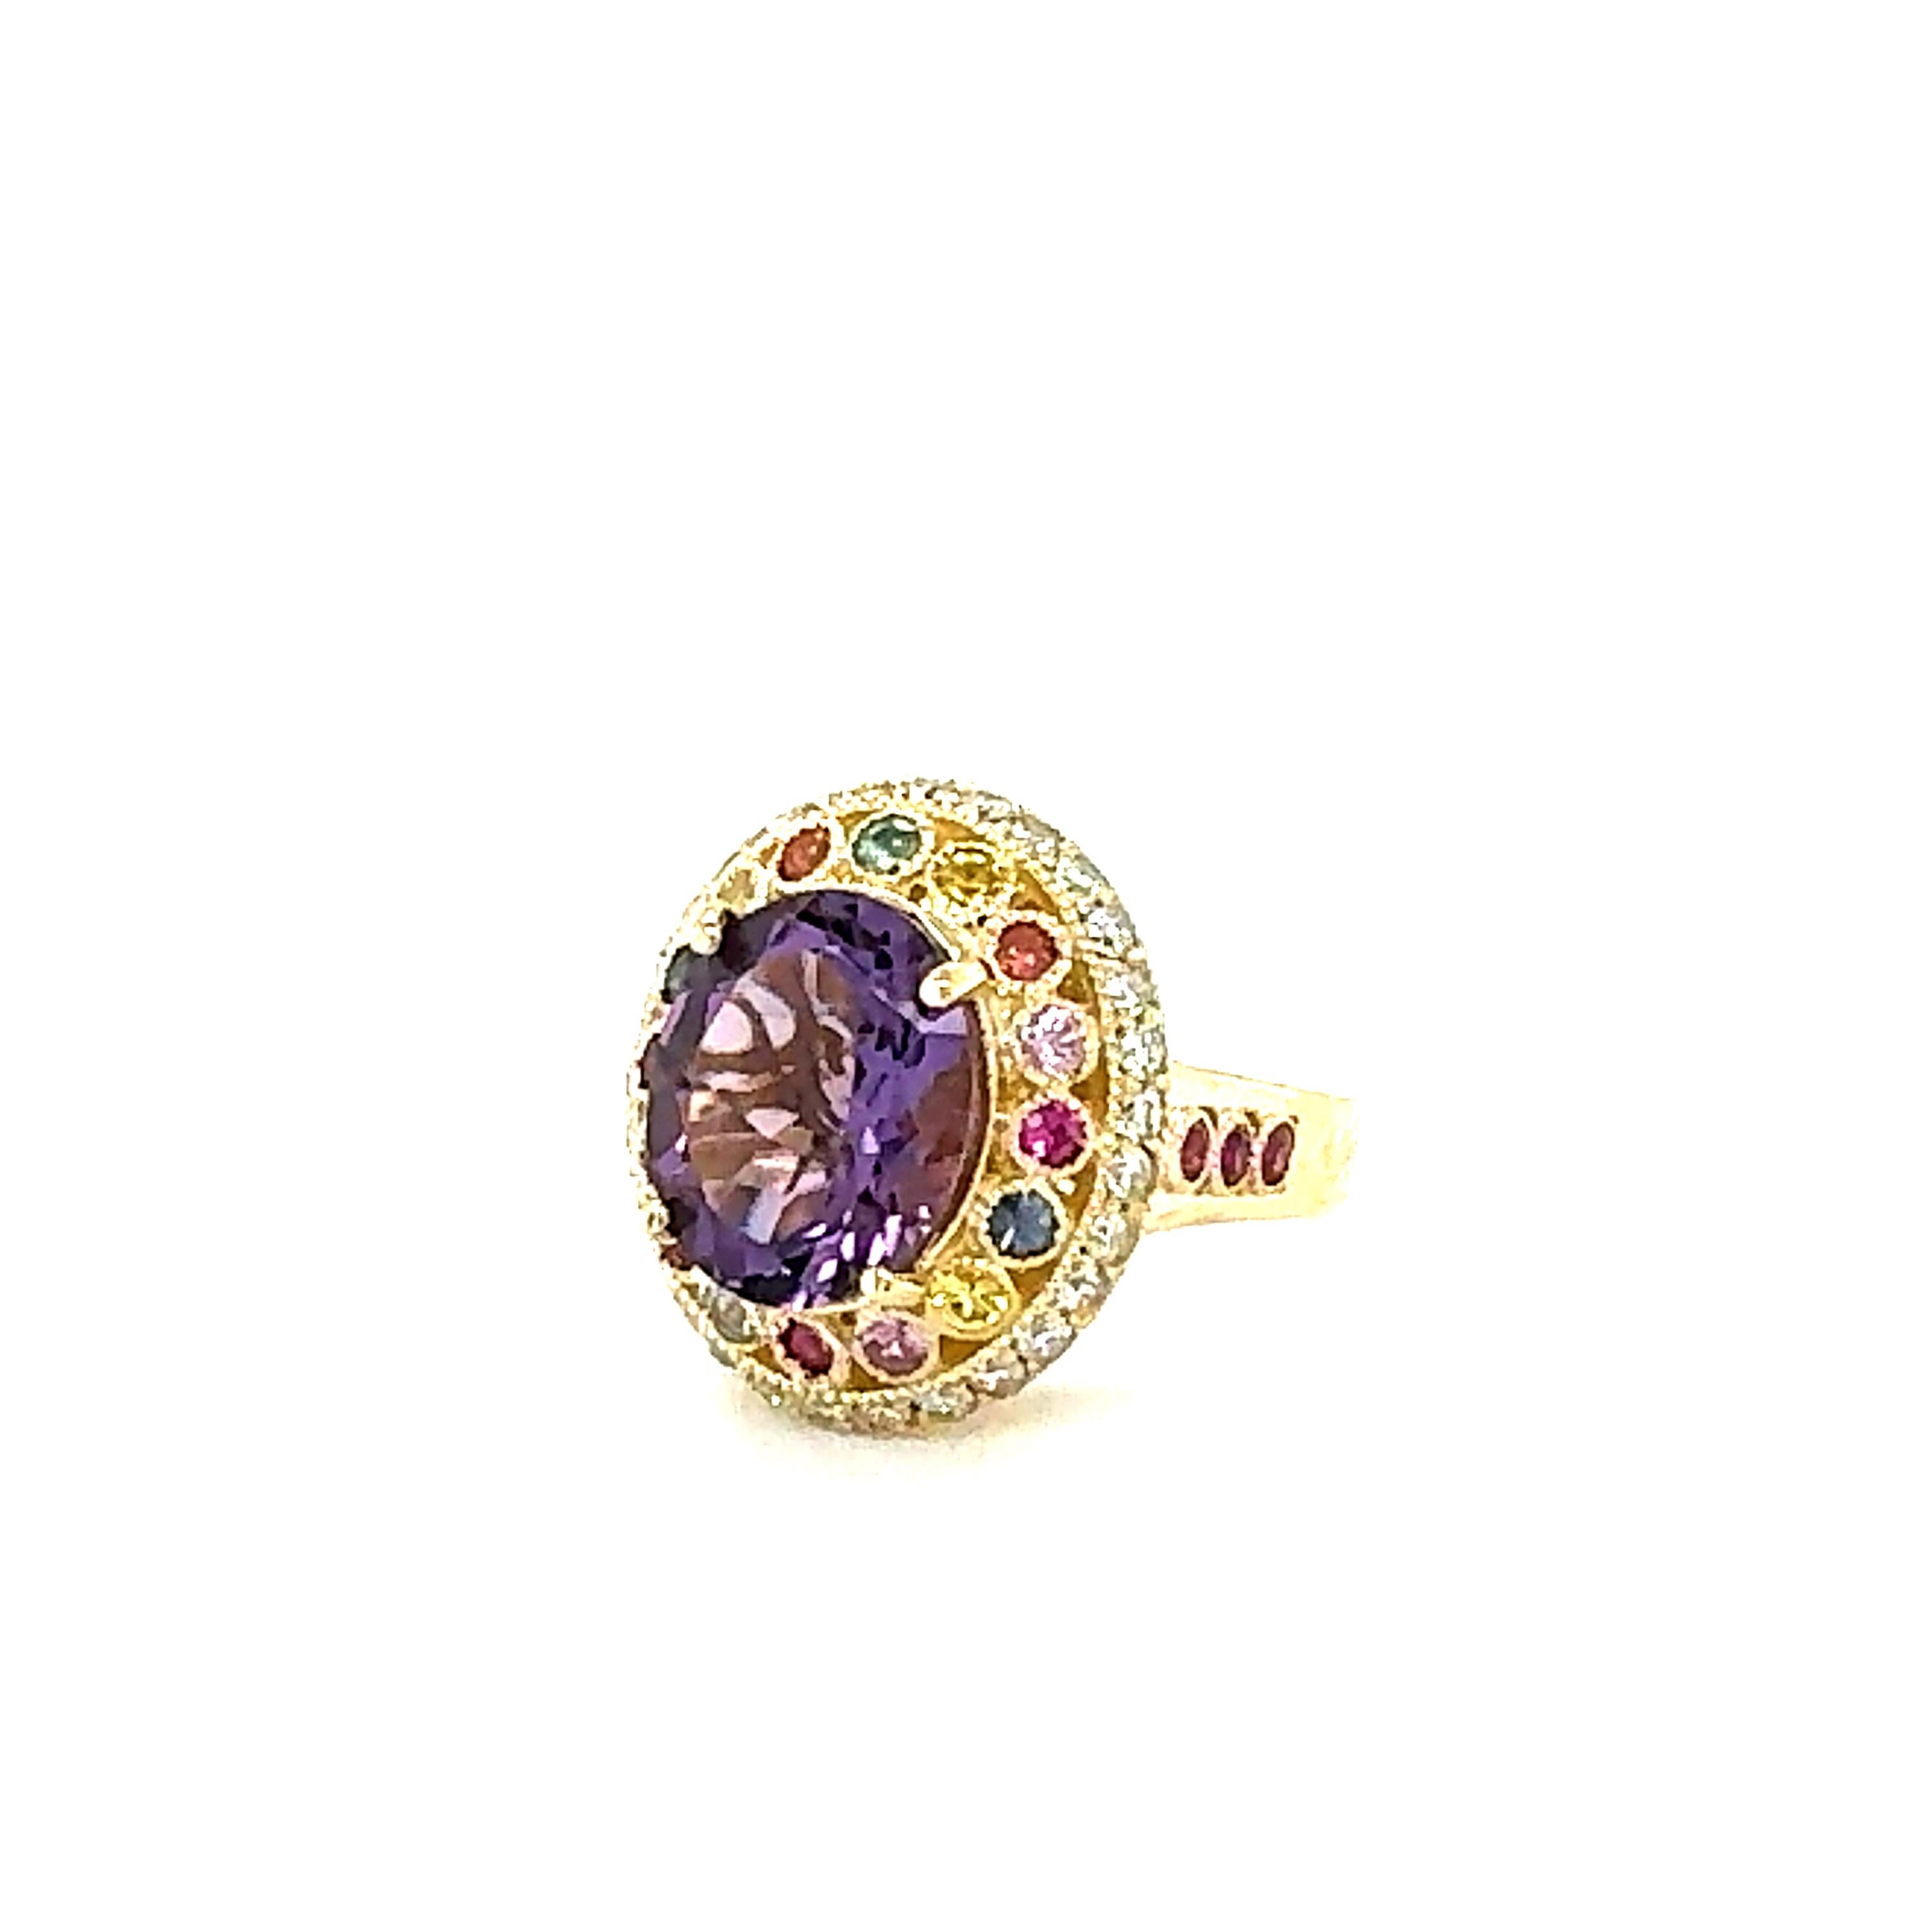 Oval Cut 5.62 Carat Natural Amethyst Diamond Sapphire Yellow Gold Cocktail Ring For Sale